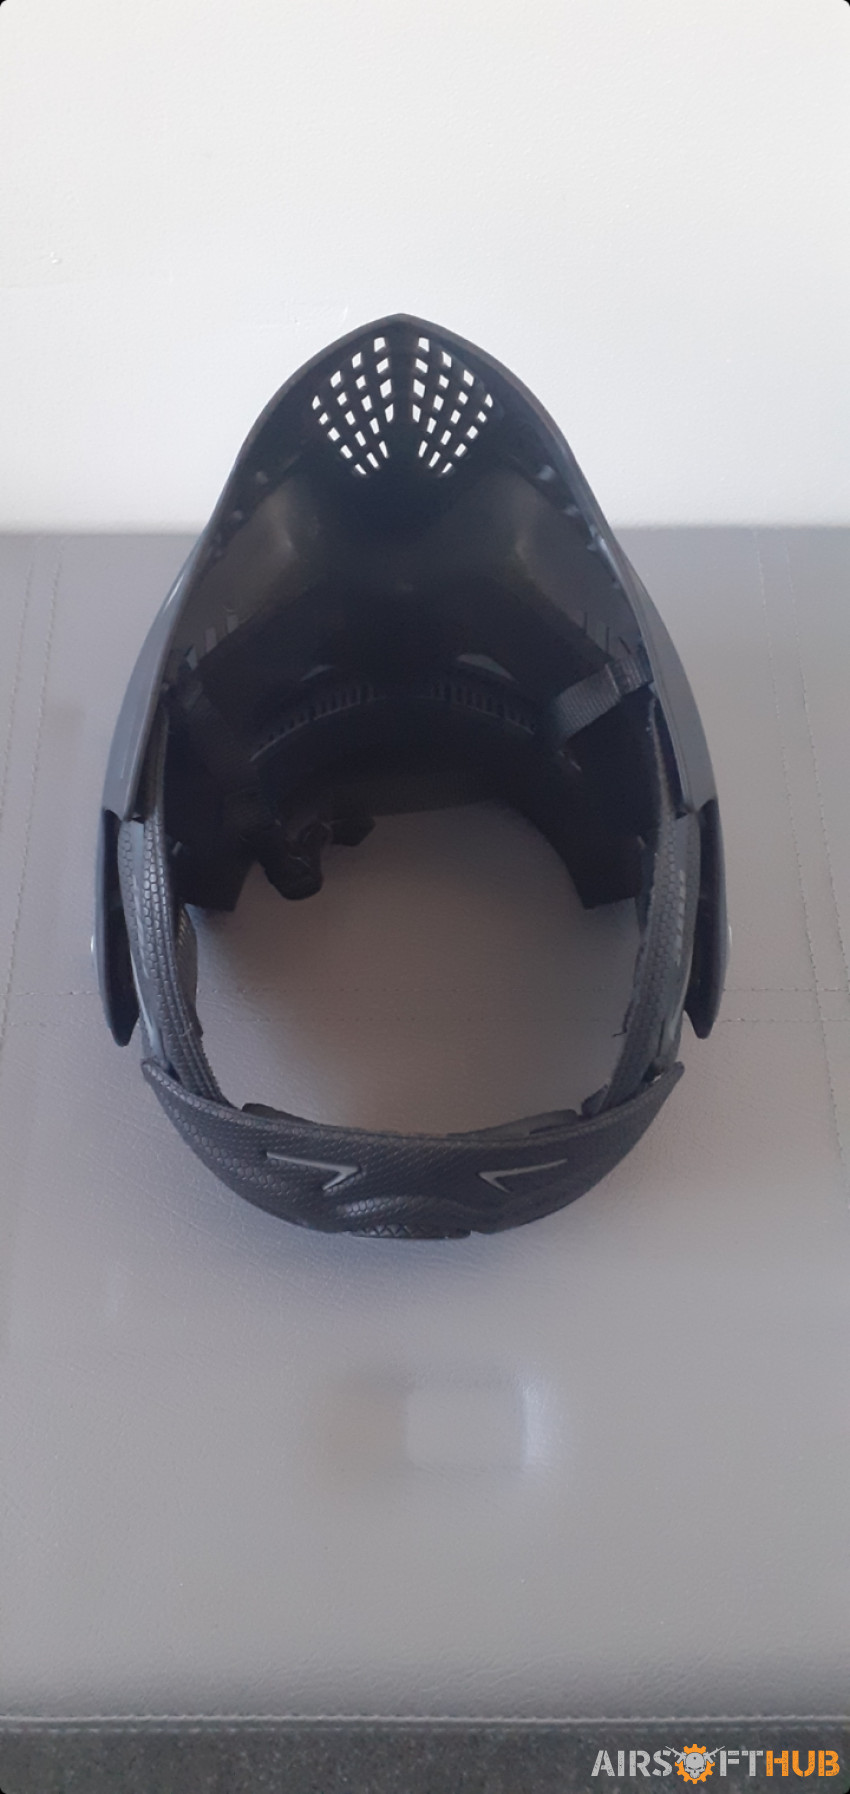 Dye i4 Pro Shadow Mask - Used airsoft equipment